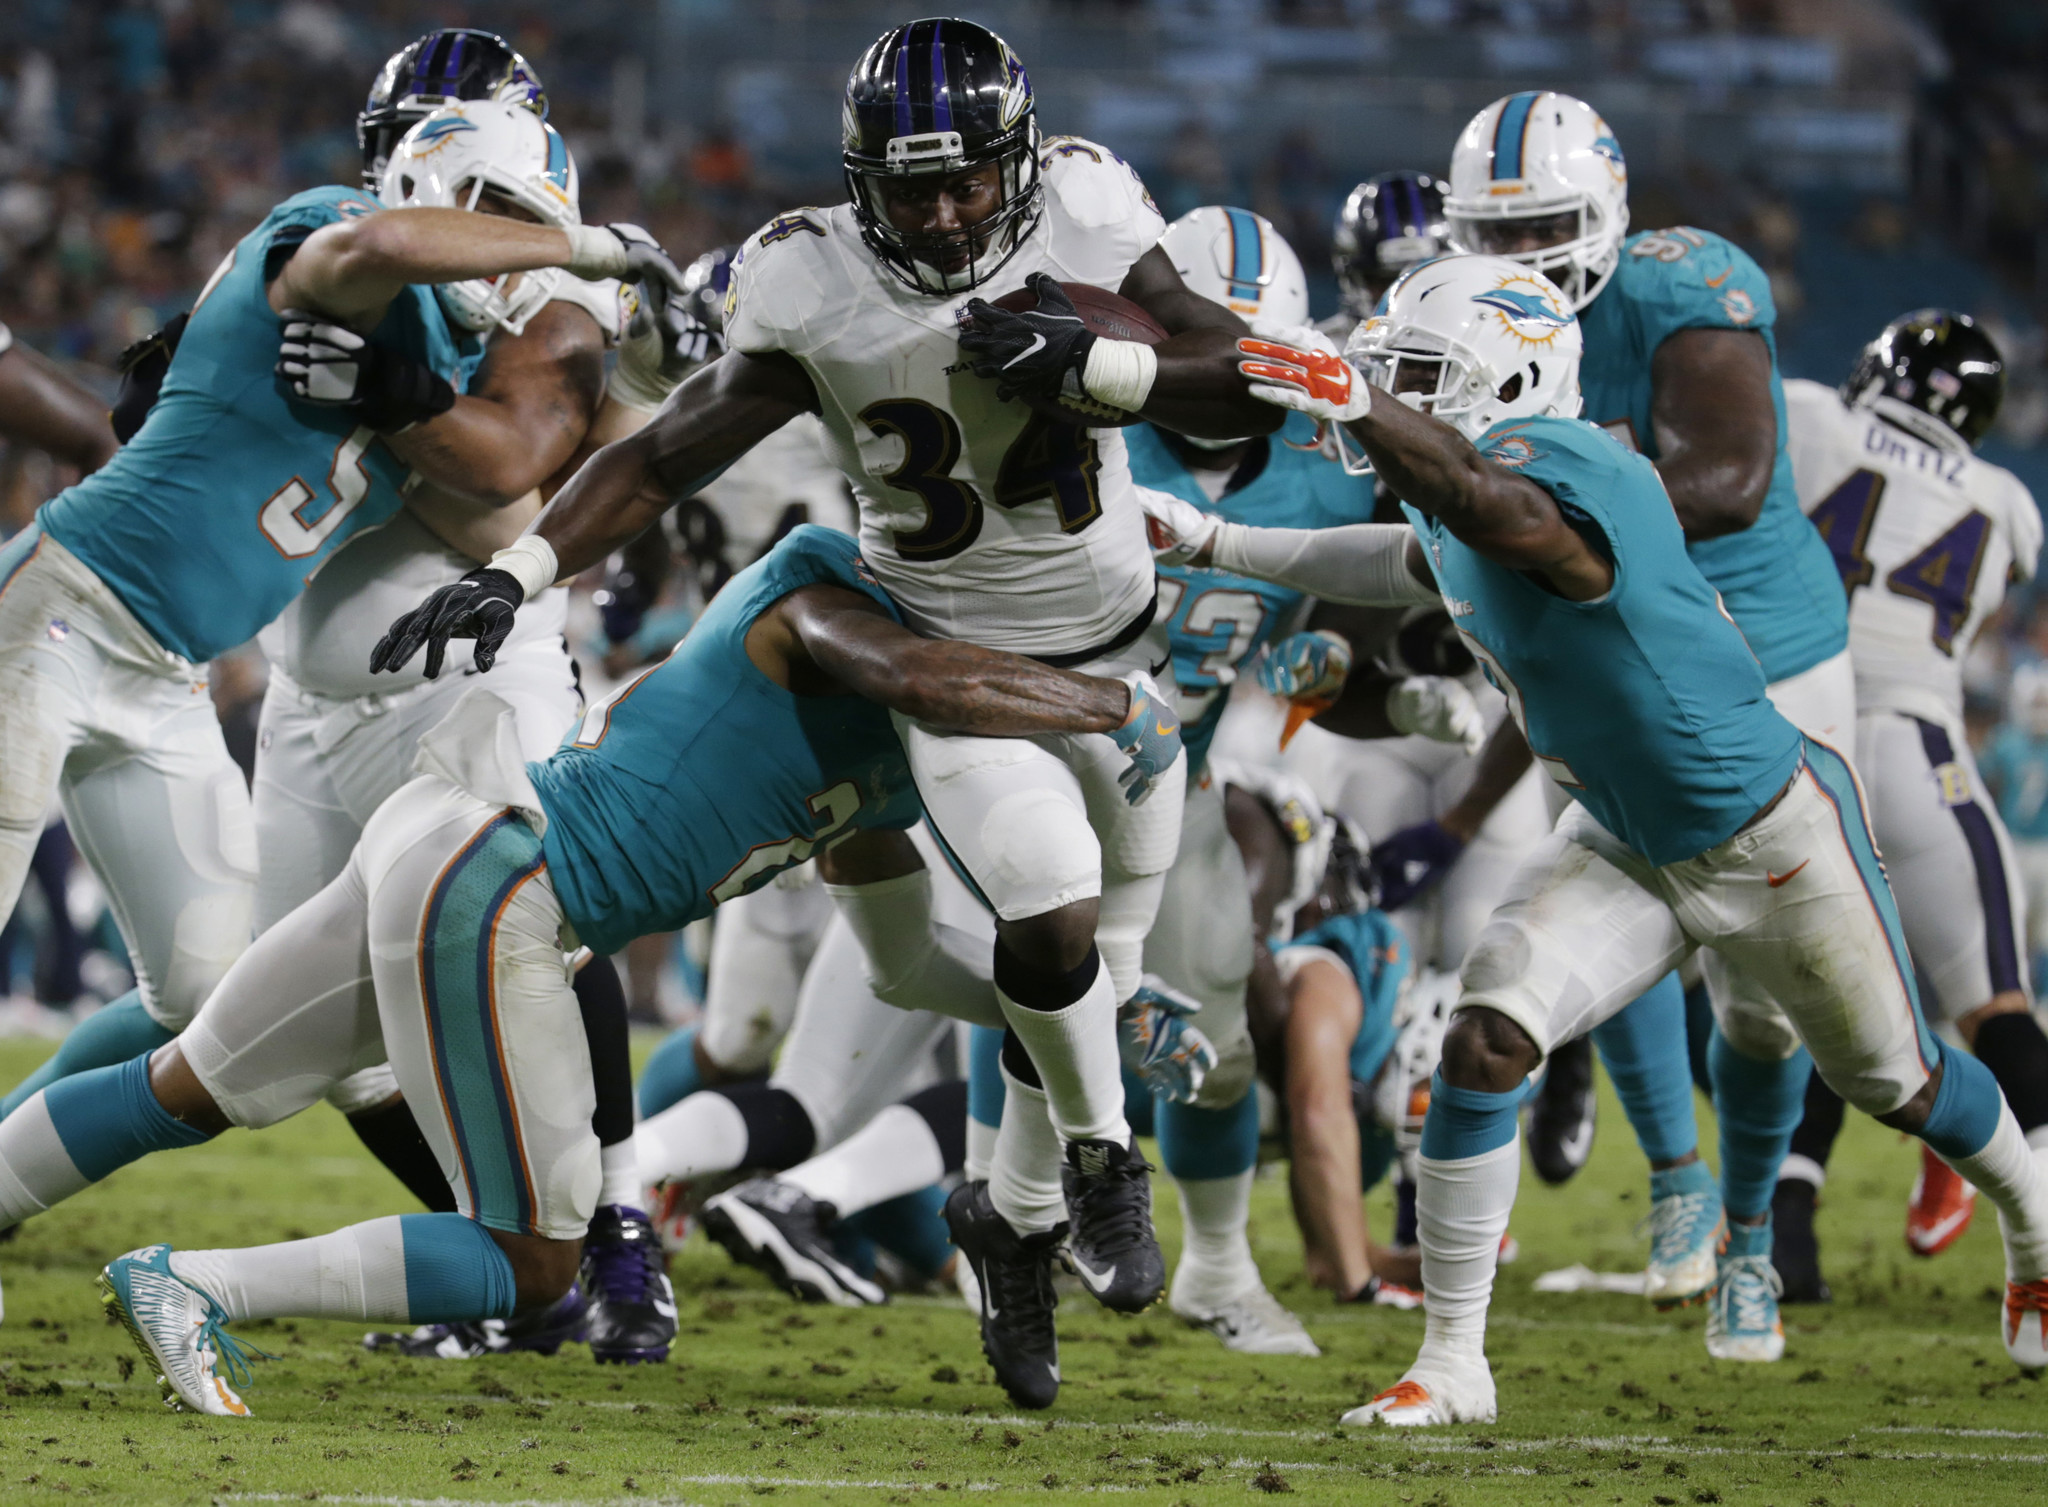 In the Ravens Game, Miami flashed talent and warts